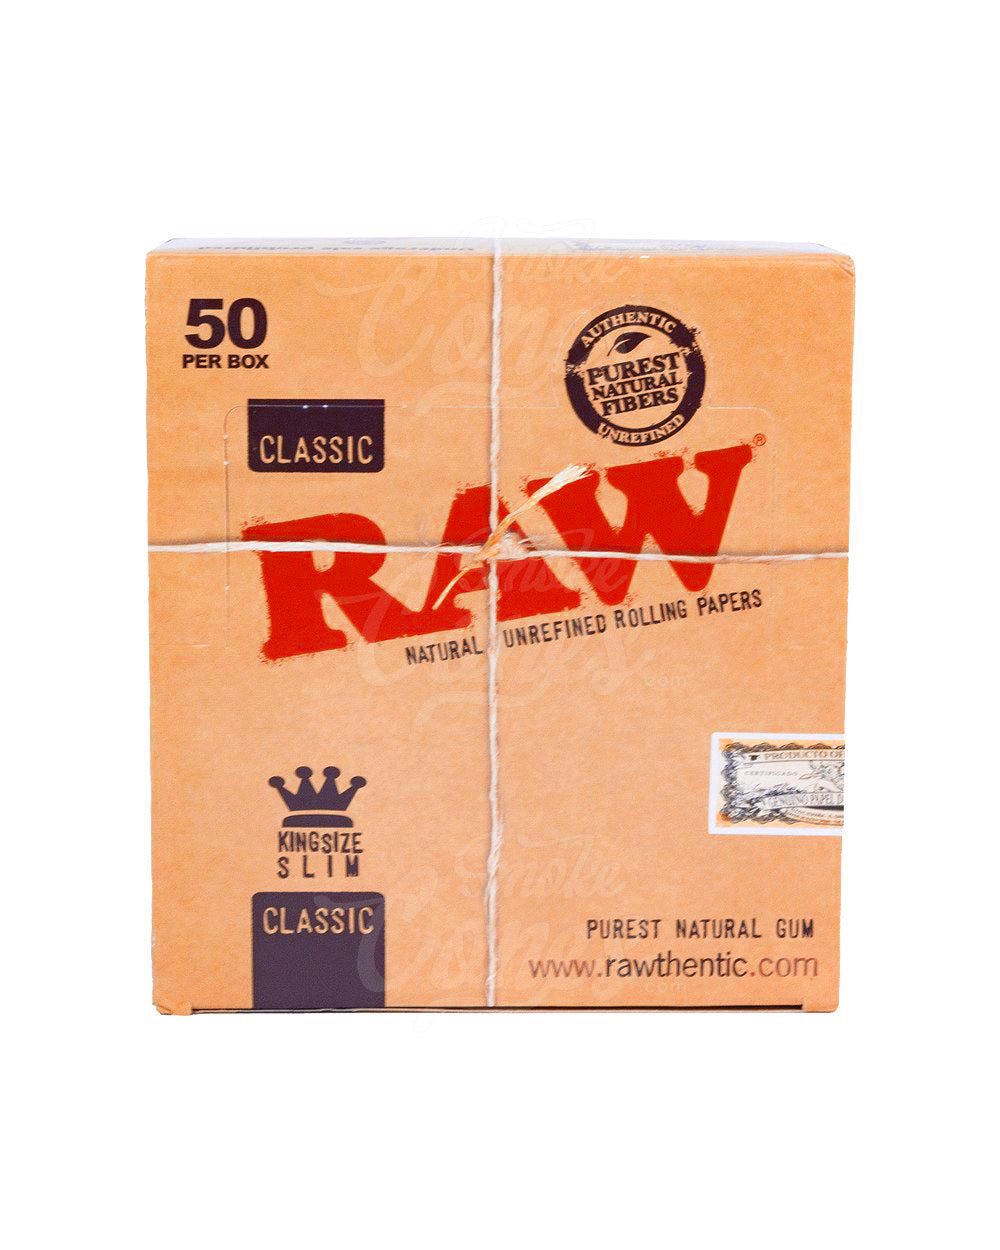 RAW King Size Slim Classic Rolling Papers 50/Box - 4